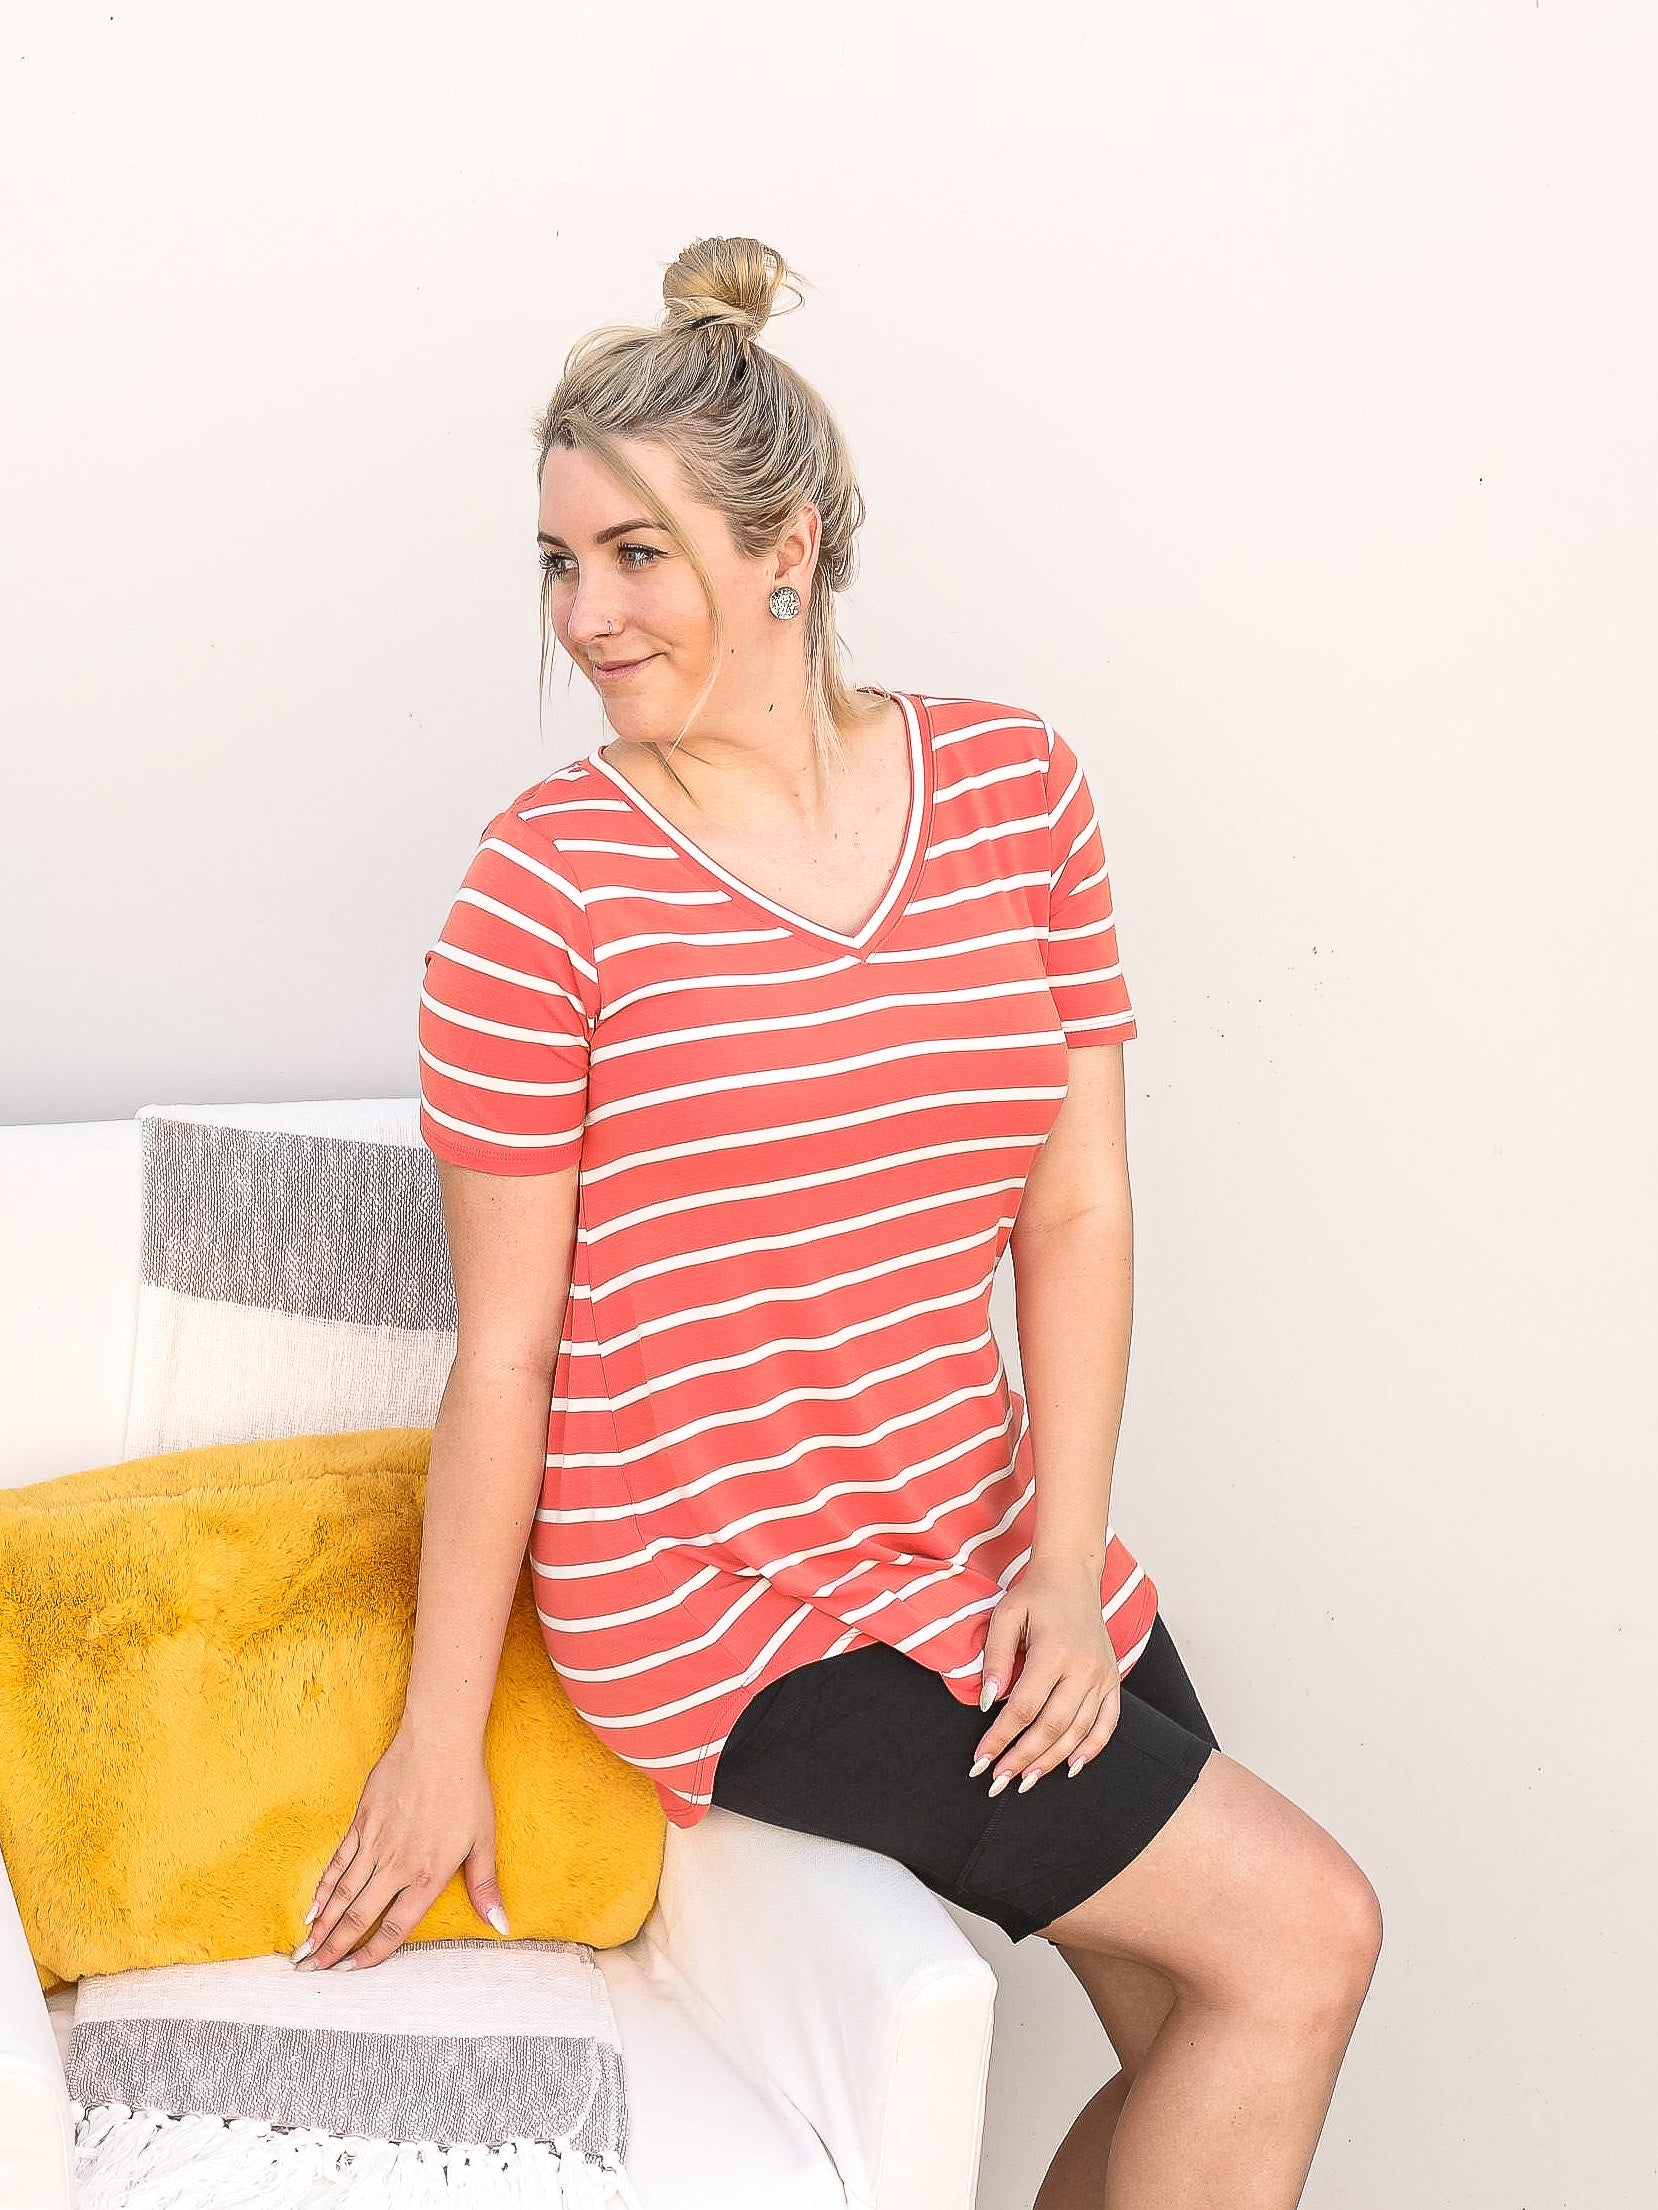 Copper, light weight v neck short sleeve  top with horizontal stripes down the front.